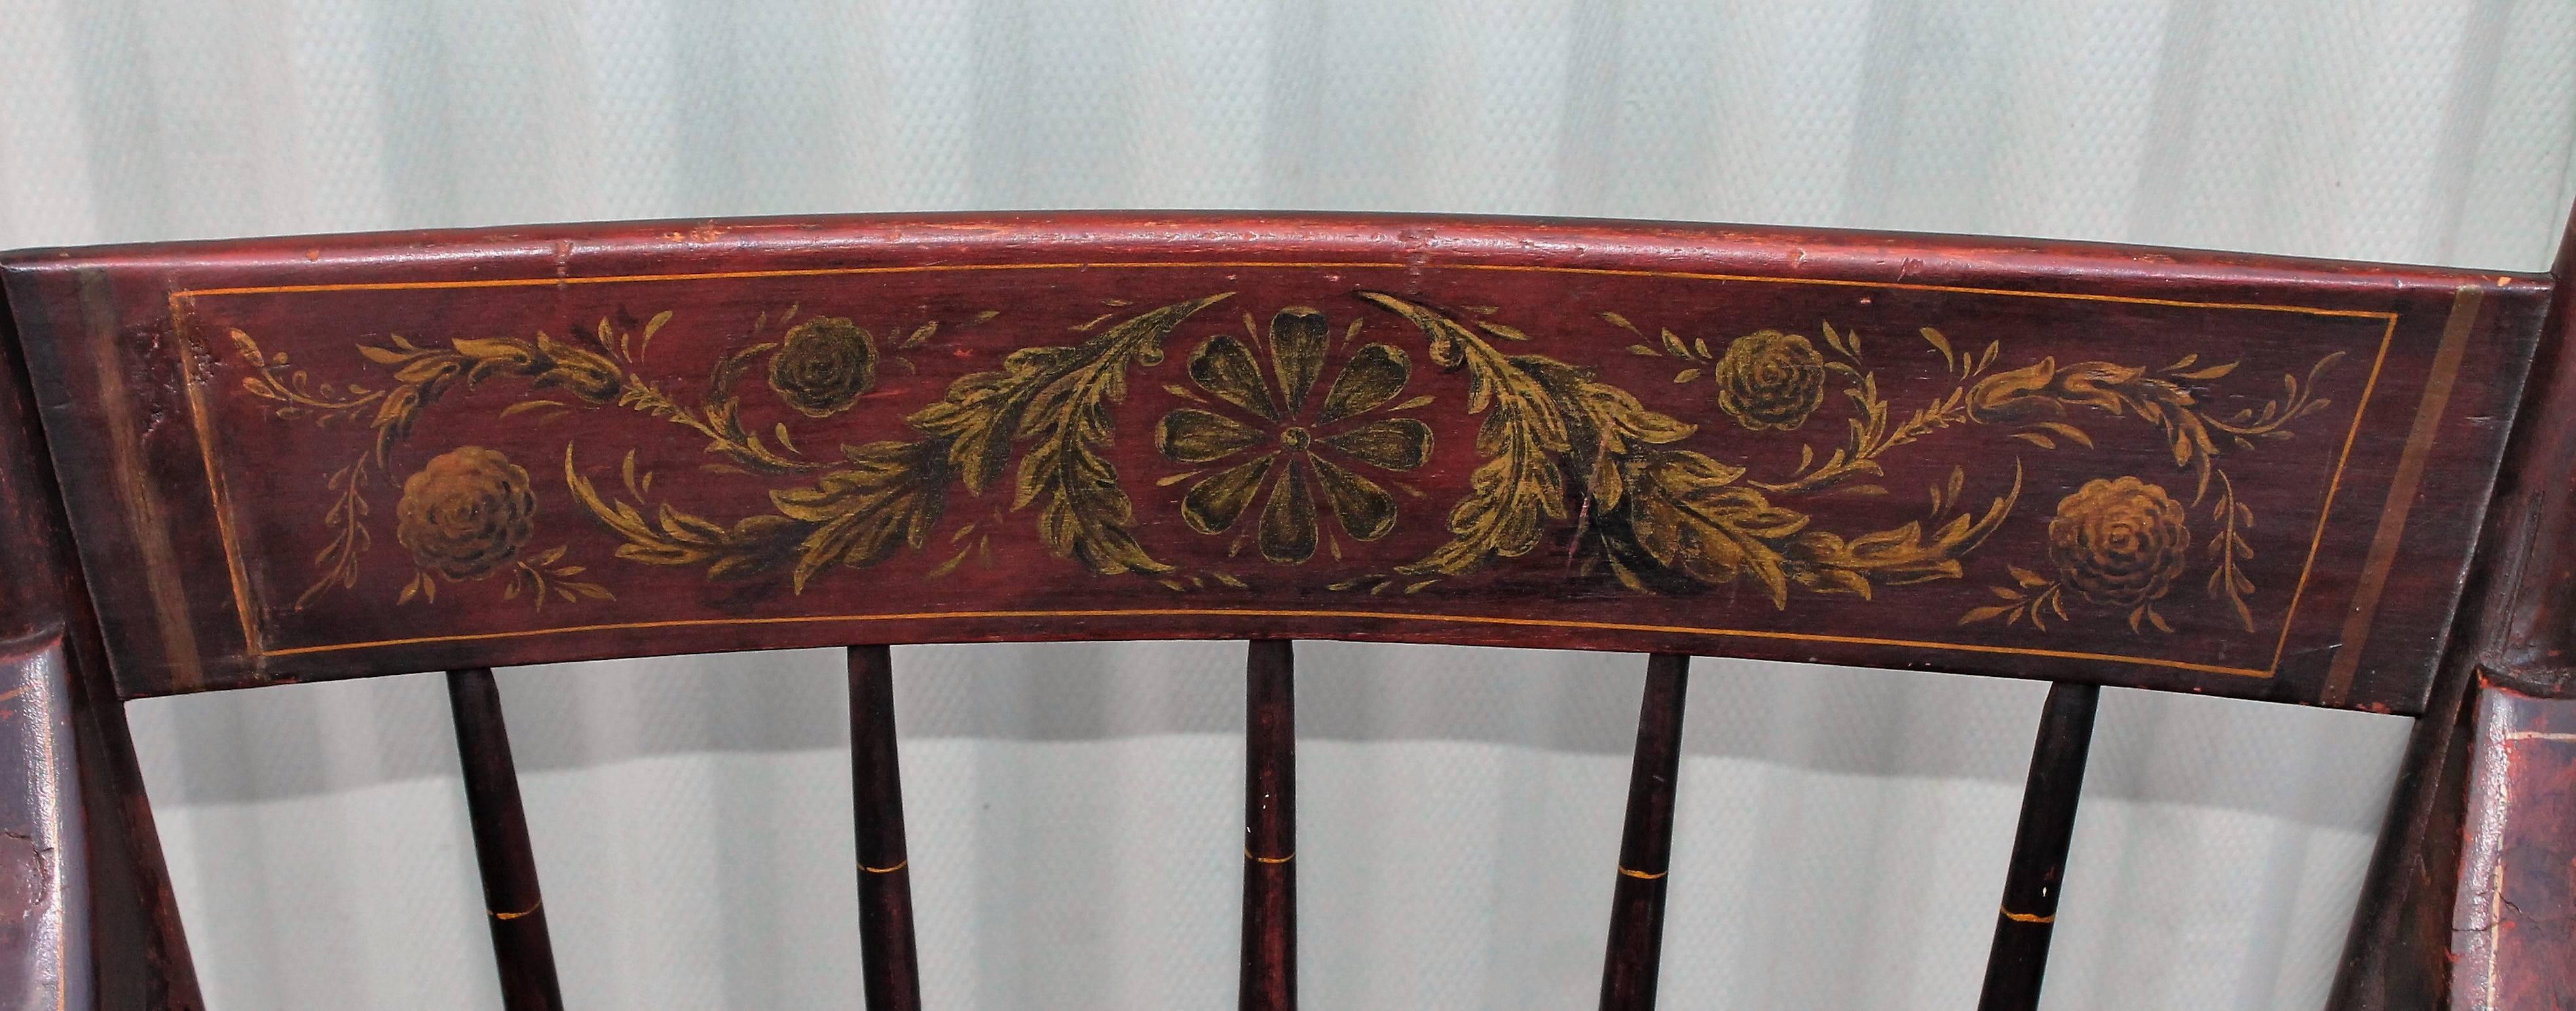 Early 19th century original painted Hitchcock armchair with a decorated inside back. The condition is very good and sturdy. The back round has a wonderful redish brown surface. The paint is in a undisturbed patina.